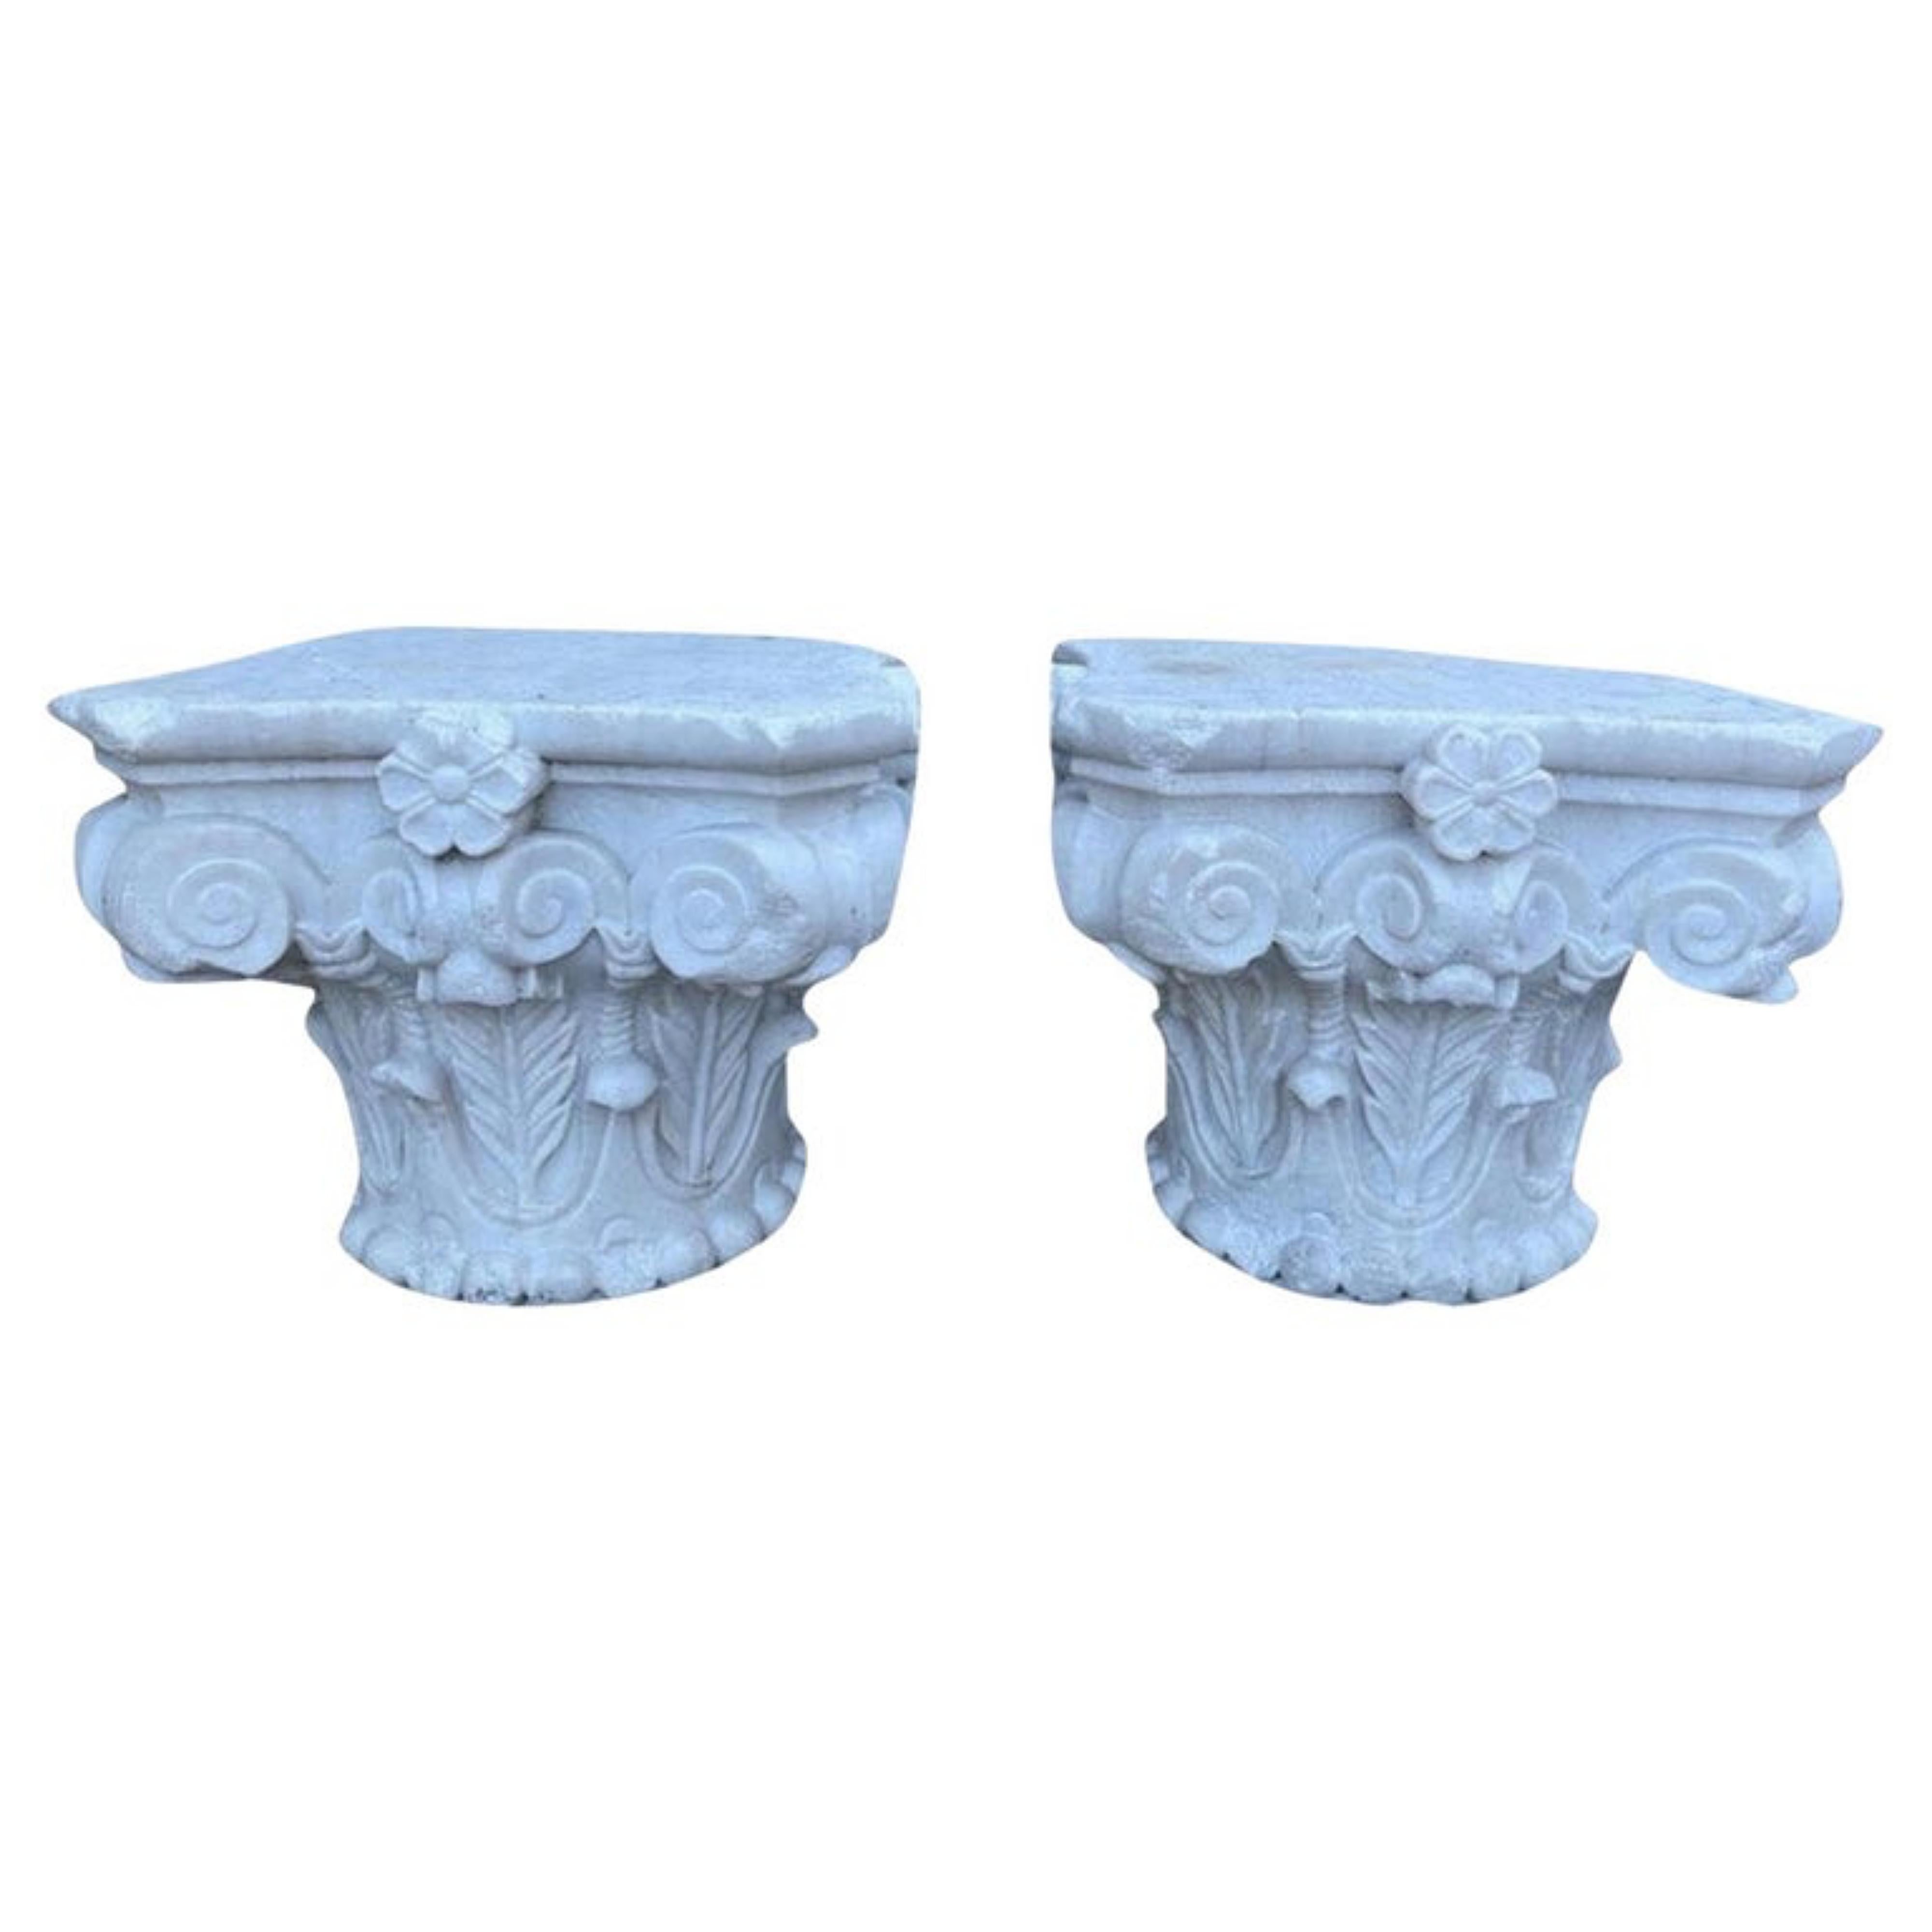 19th Century Pair of Italian Capitals in White Carrara Marble Final 19th / Early 20th Century For Sale